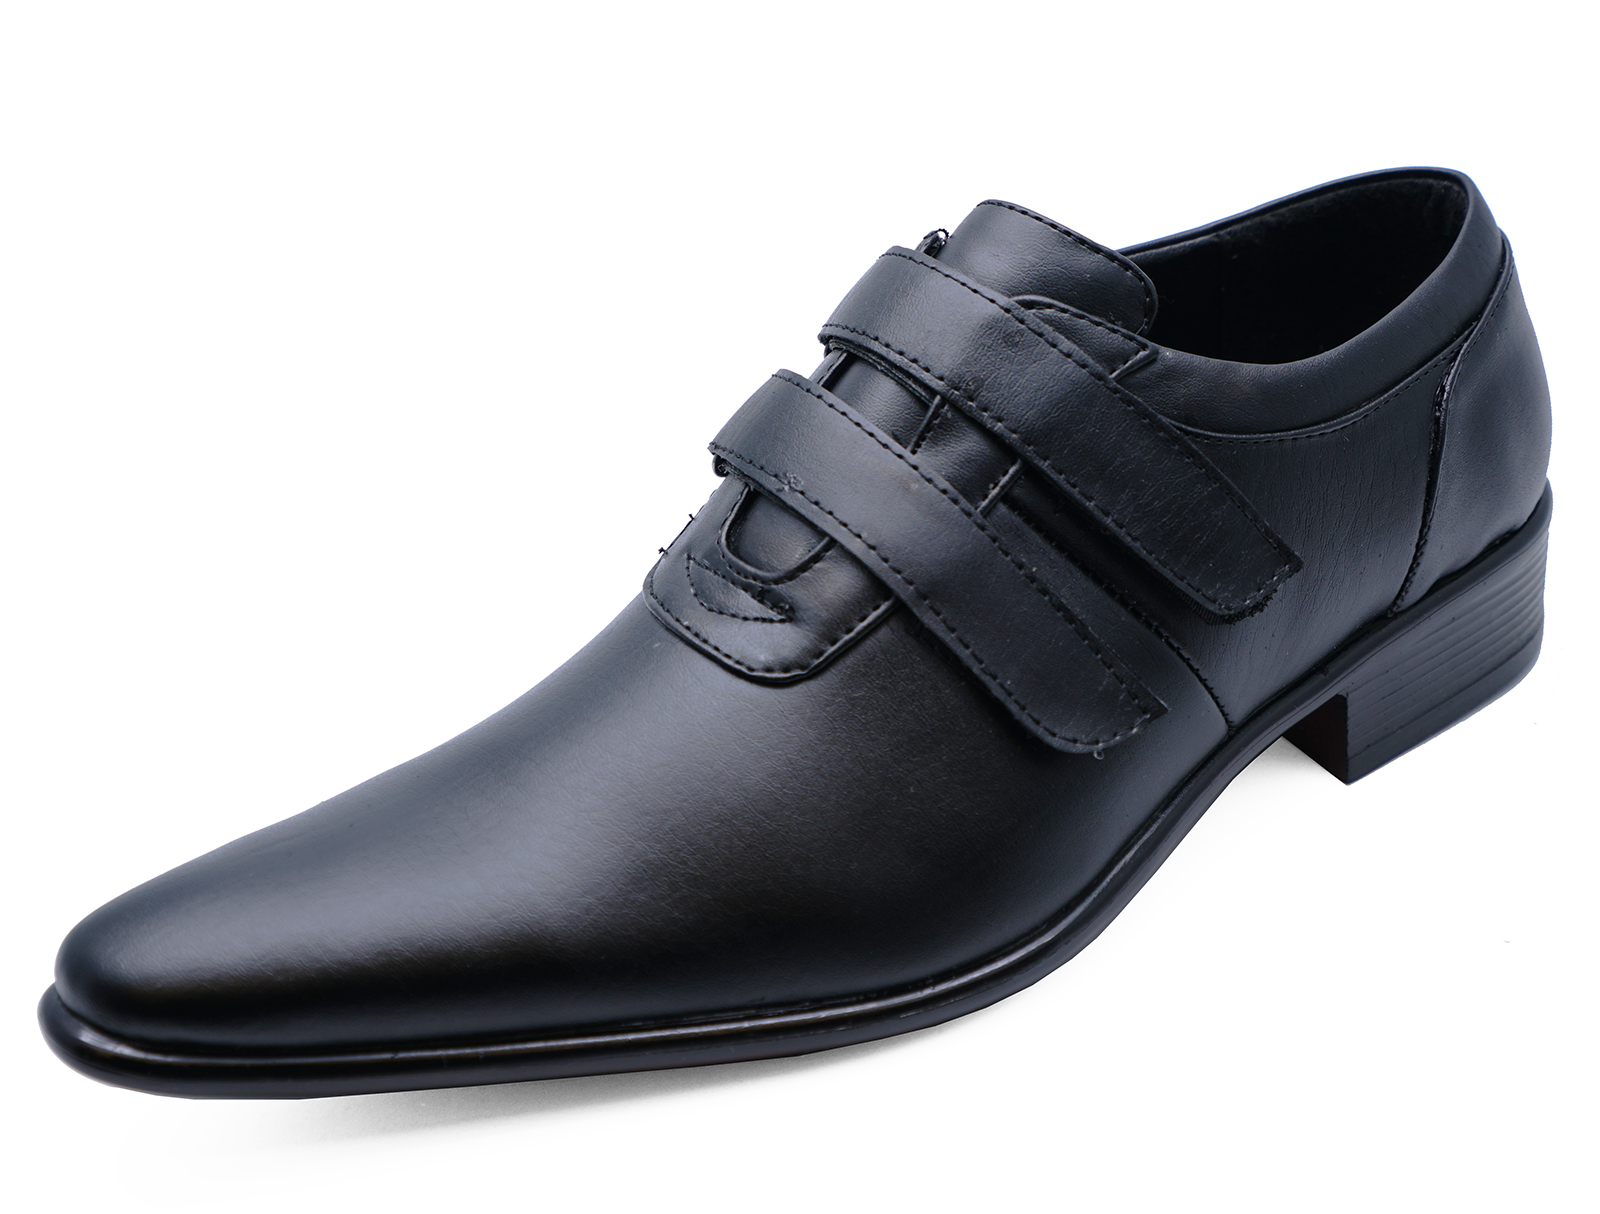 MENS SMART WORK WEDDING CASUAL LOAFERS 